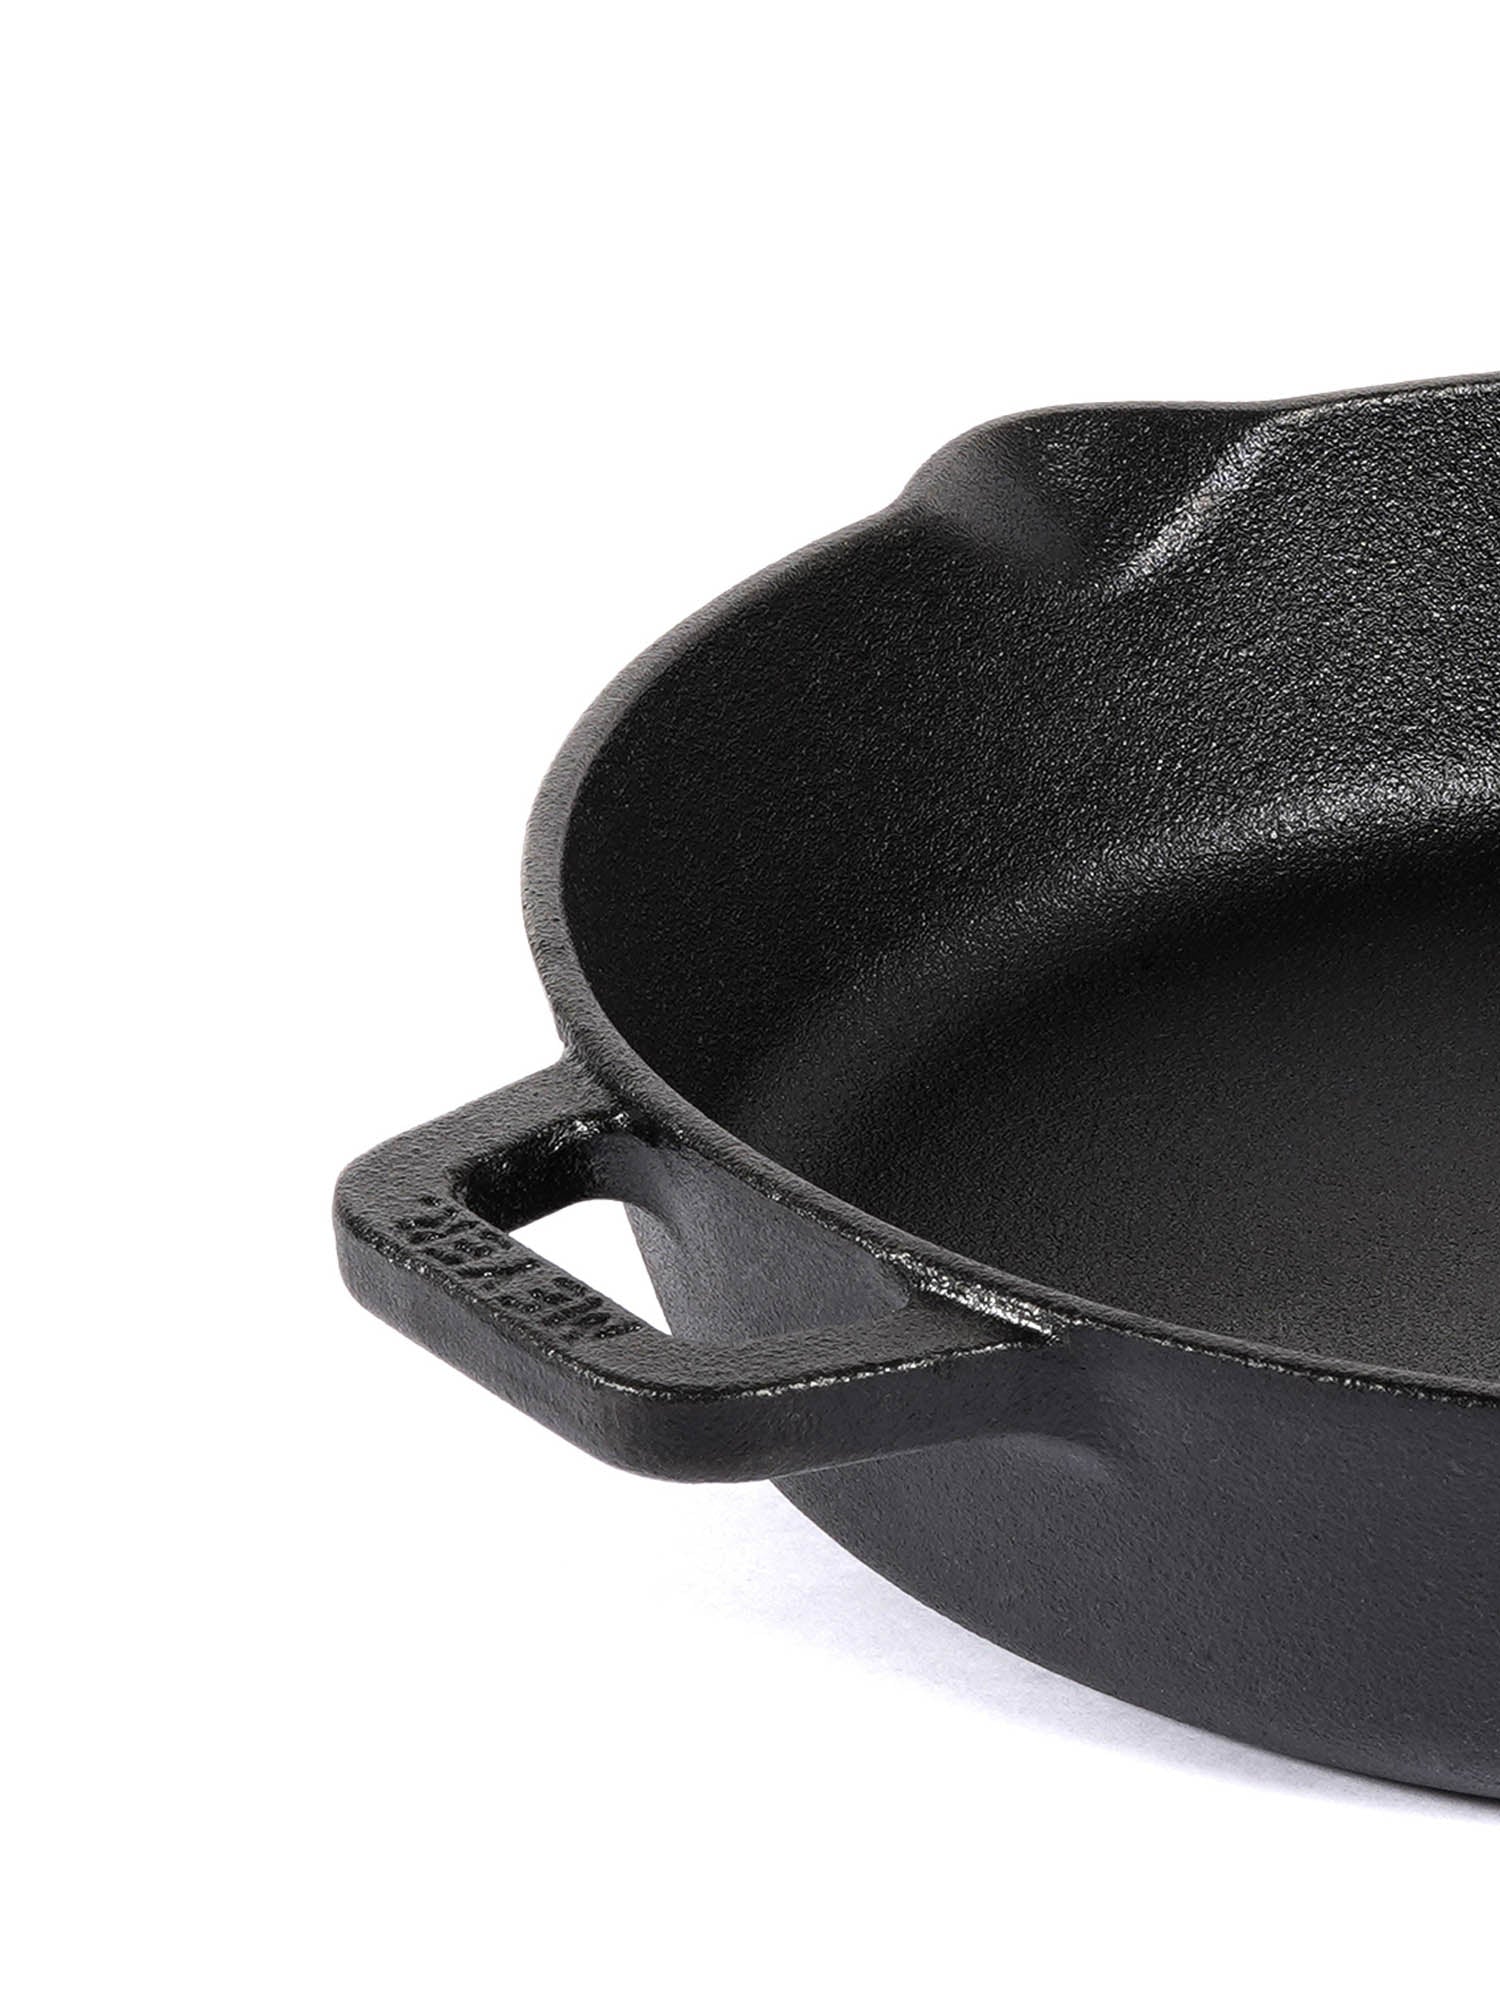 Meyer 24cm Cast Iron Skillet with 2 side Handle